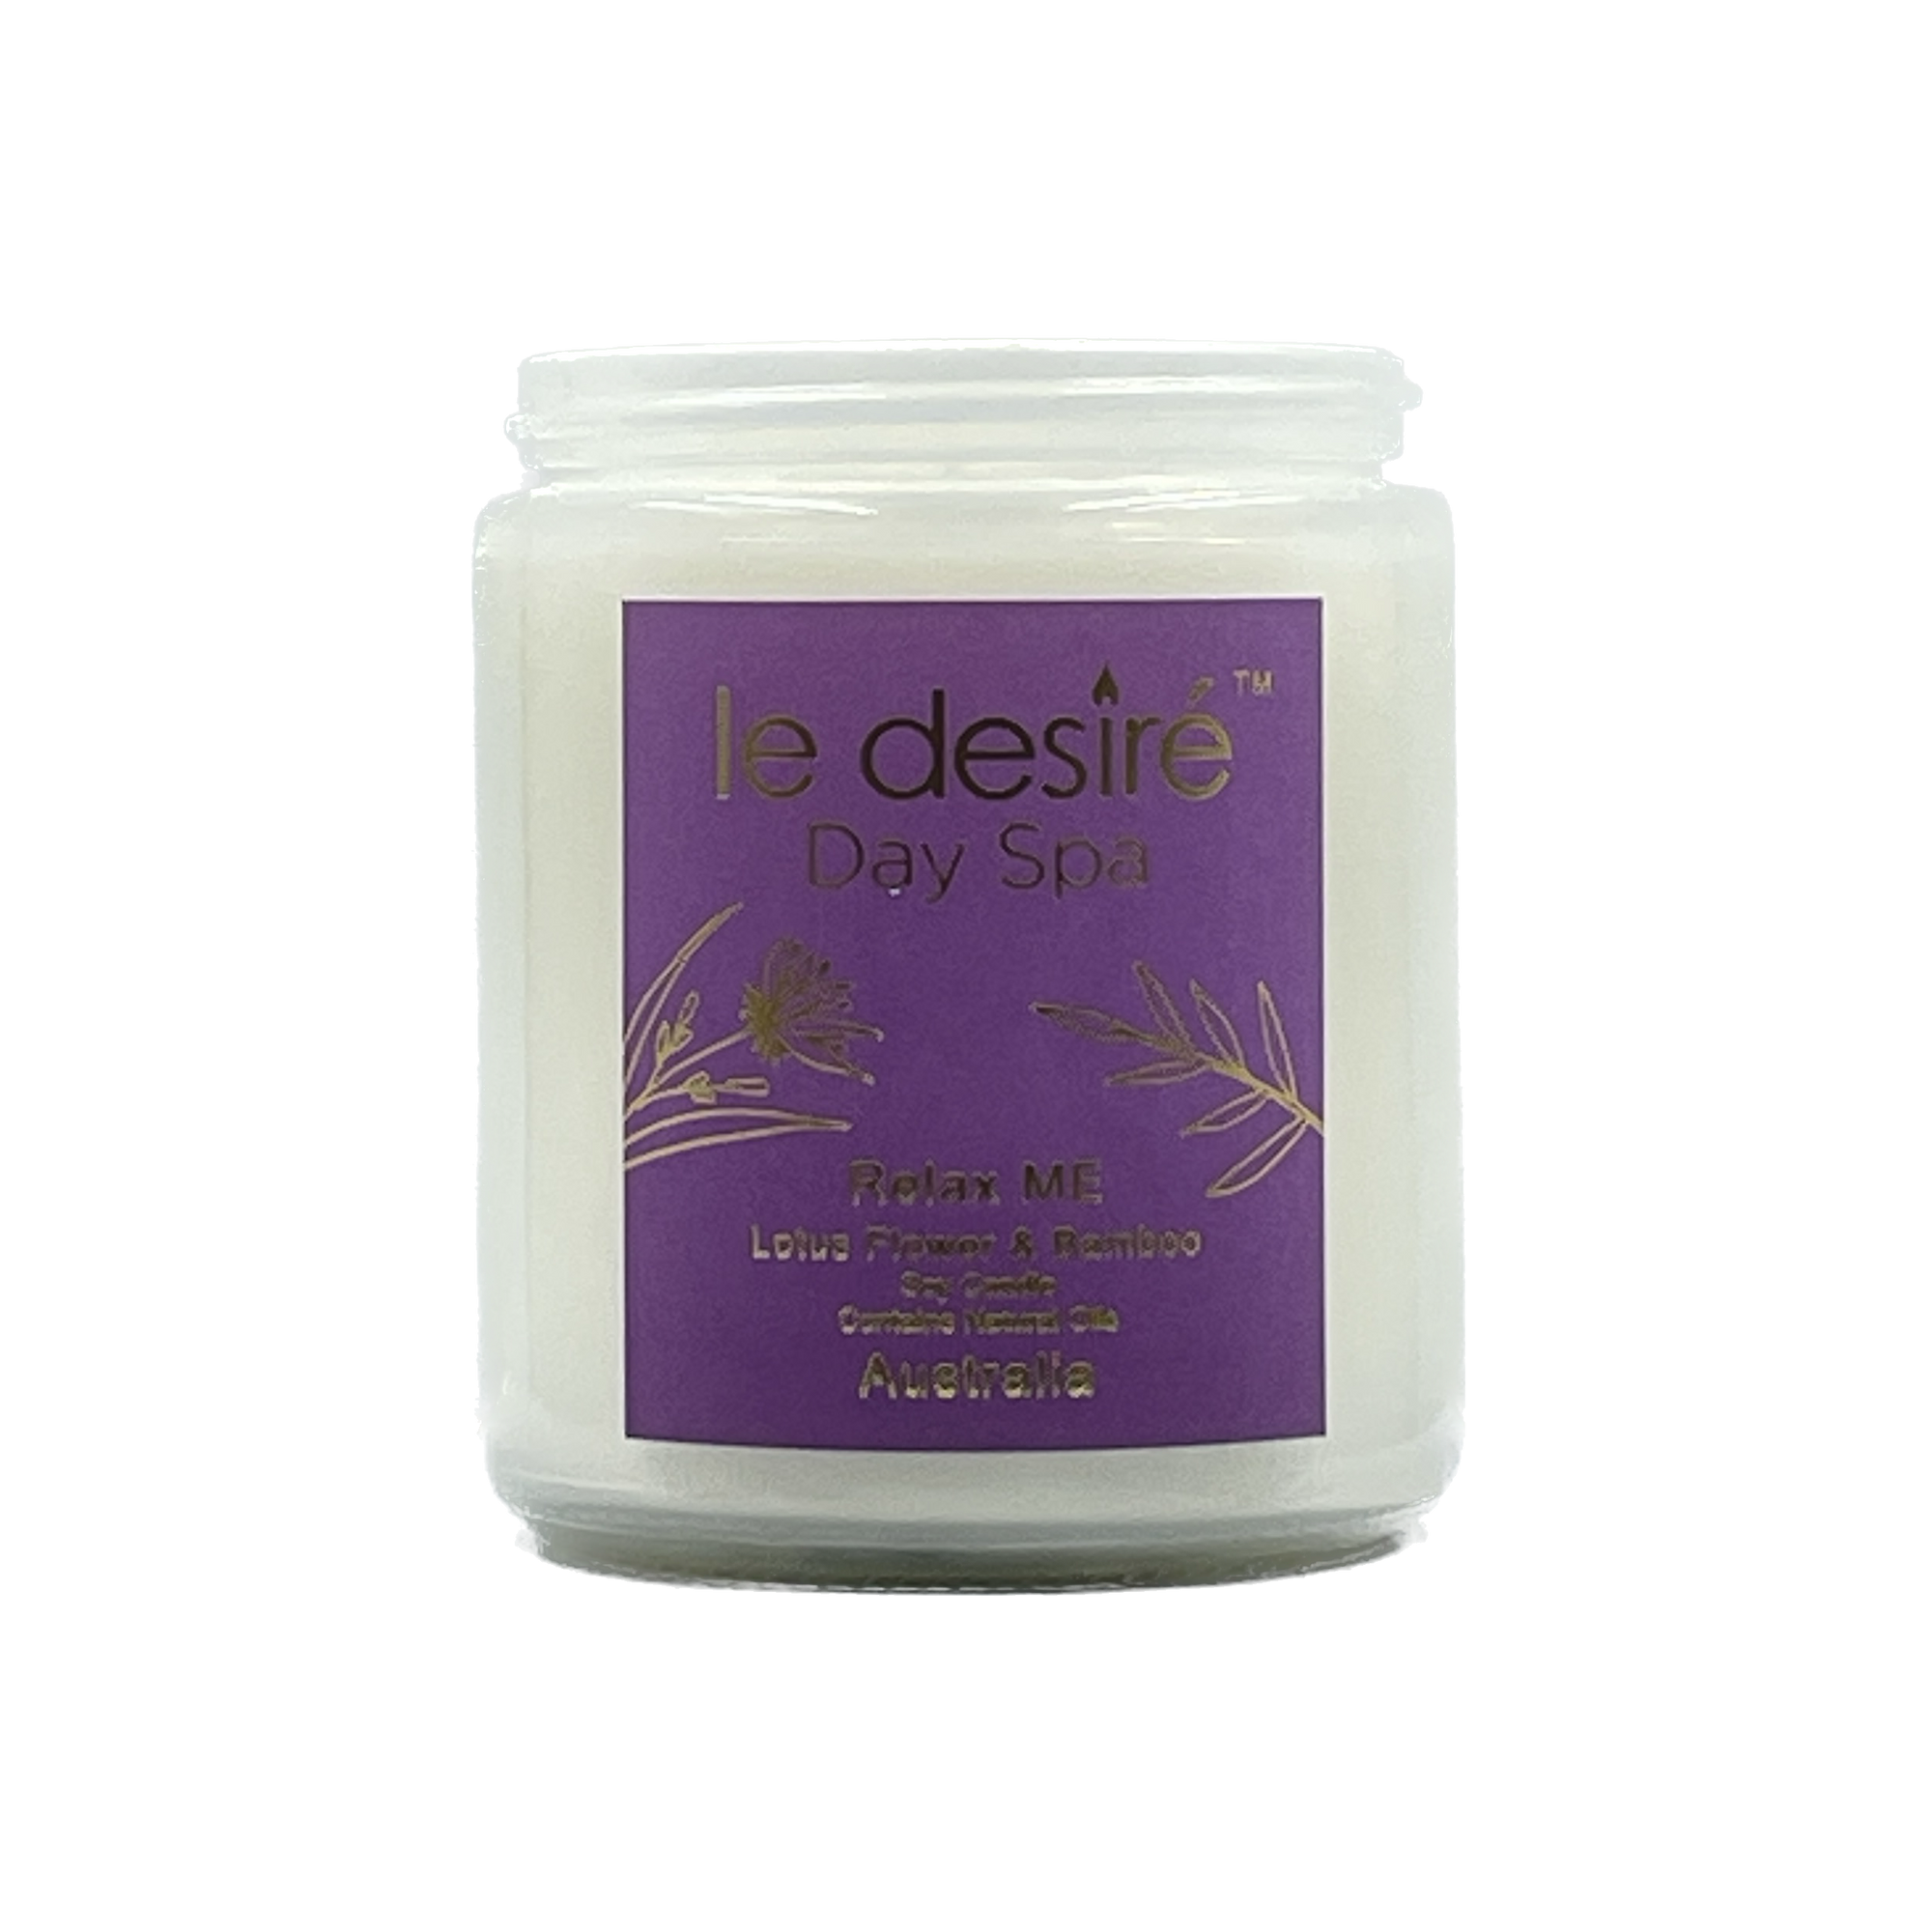 Relax ME (Lotus Flower & Bamboo) - Day Spa Soy Candle